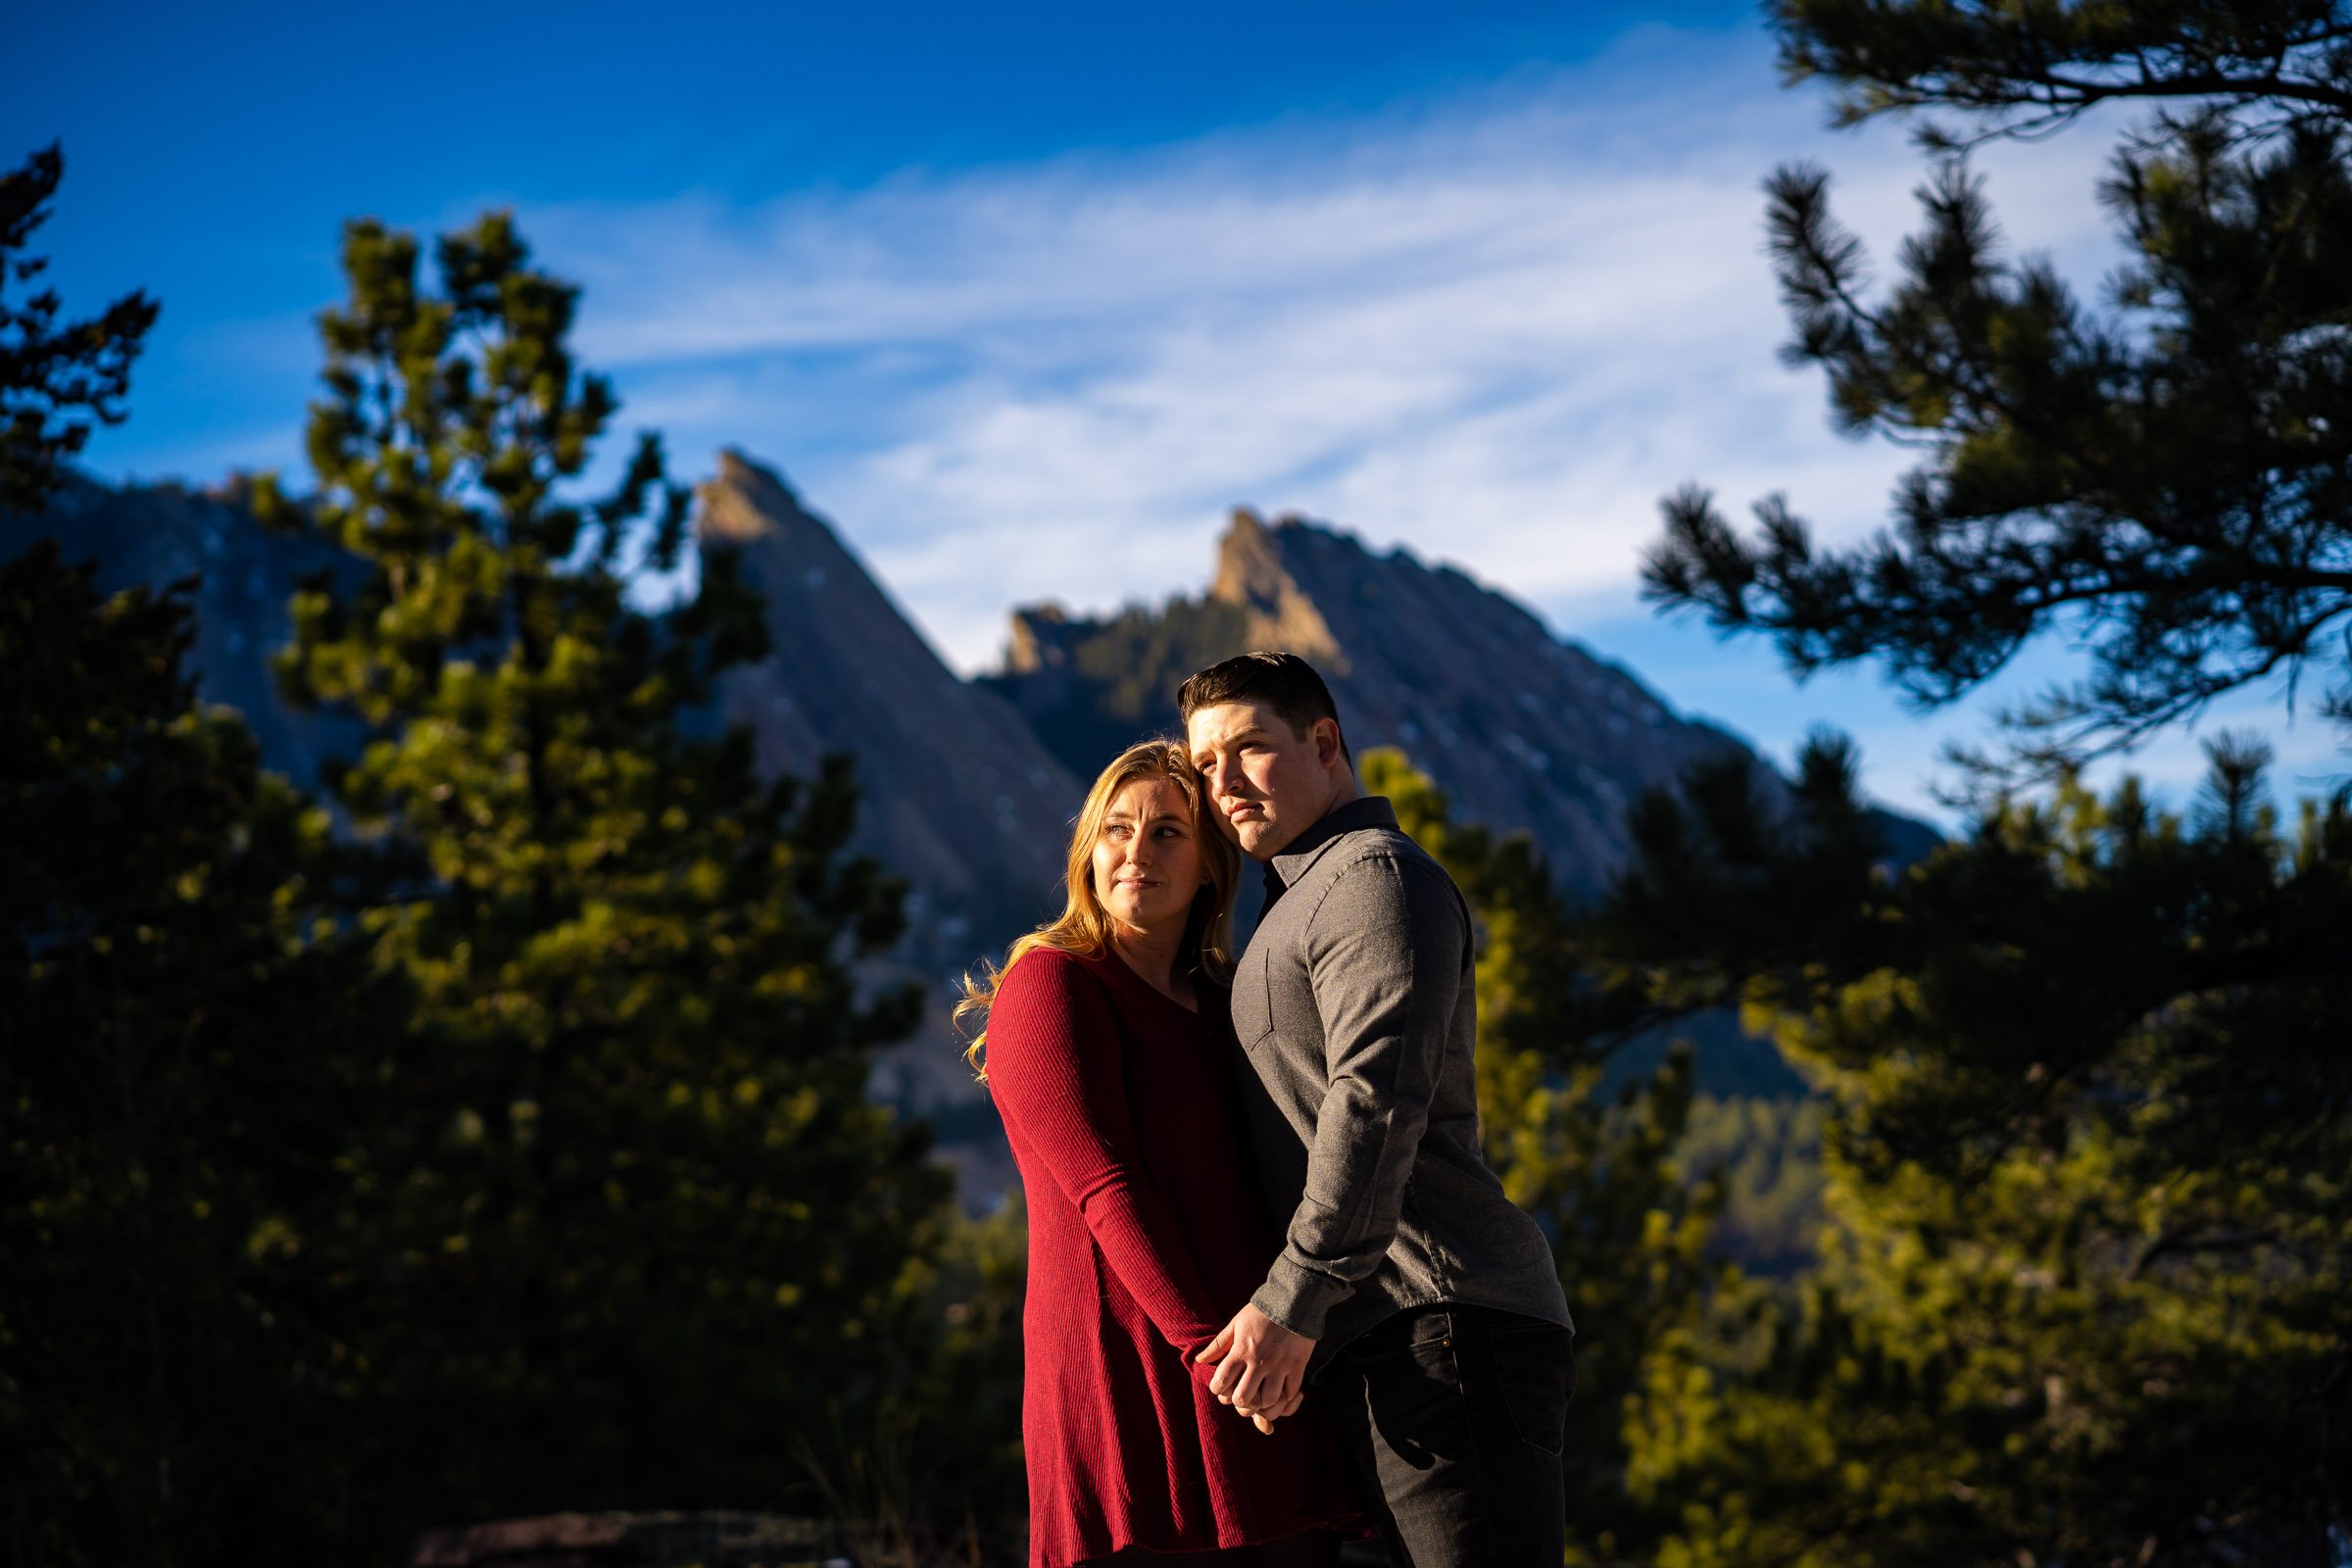 Engaged couple poses for portraits with the flatirons mountains in the background, Mountain Engagement Photos, Engagement Session, Engagement Photos, Engagement Photos Inspiration, Engagement Photography, Engagement Photographer, Engagement Portraits, Winter Engagement Photos, Snow Engagement Photos, Boulder engagement session, Boulder engagement photos, Boulder engagement photography, Boulder engagement photographer, Boulder engagement inspiration, NCAR Trail engagement session, NCAR Trail engagement photos, NCAR Trail engagement photography, NCAR Trail engagement photographer, NCAR Trail engagement inspiration, Colorado engagement session, Colorado engagement photos, Colorado engagement photography, Colorado engagement photographer, Colorado engagement inspiration